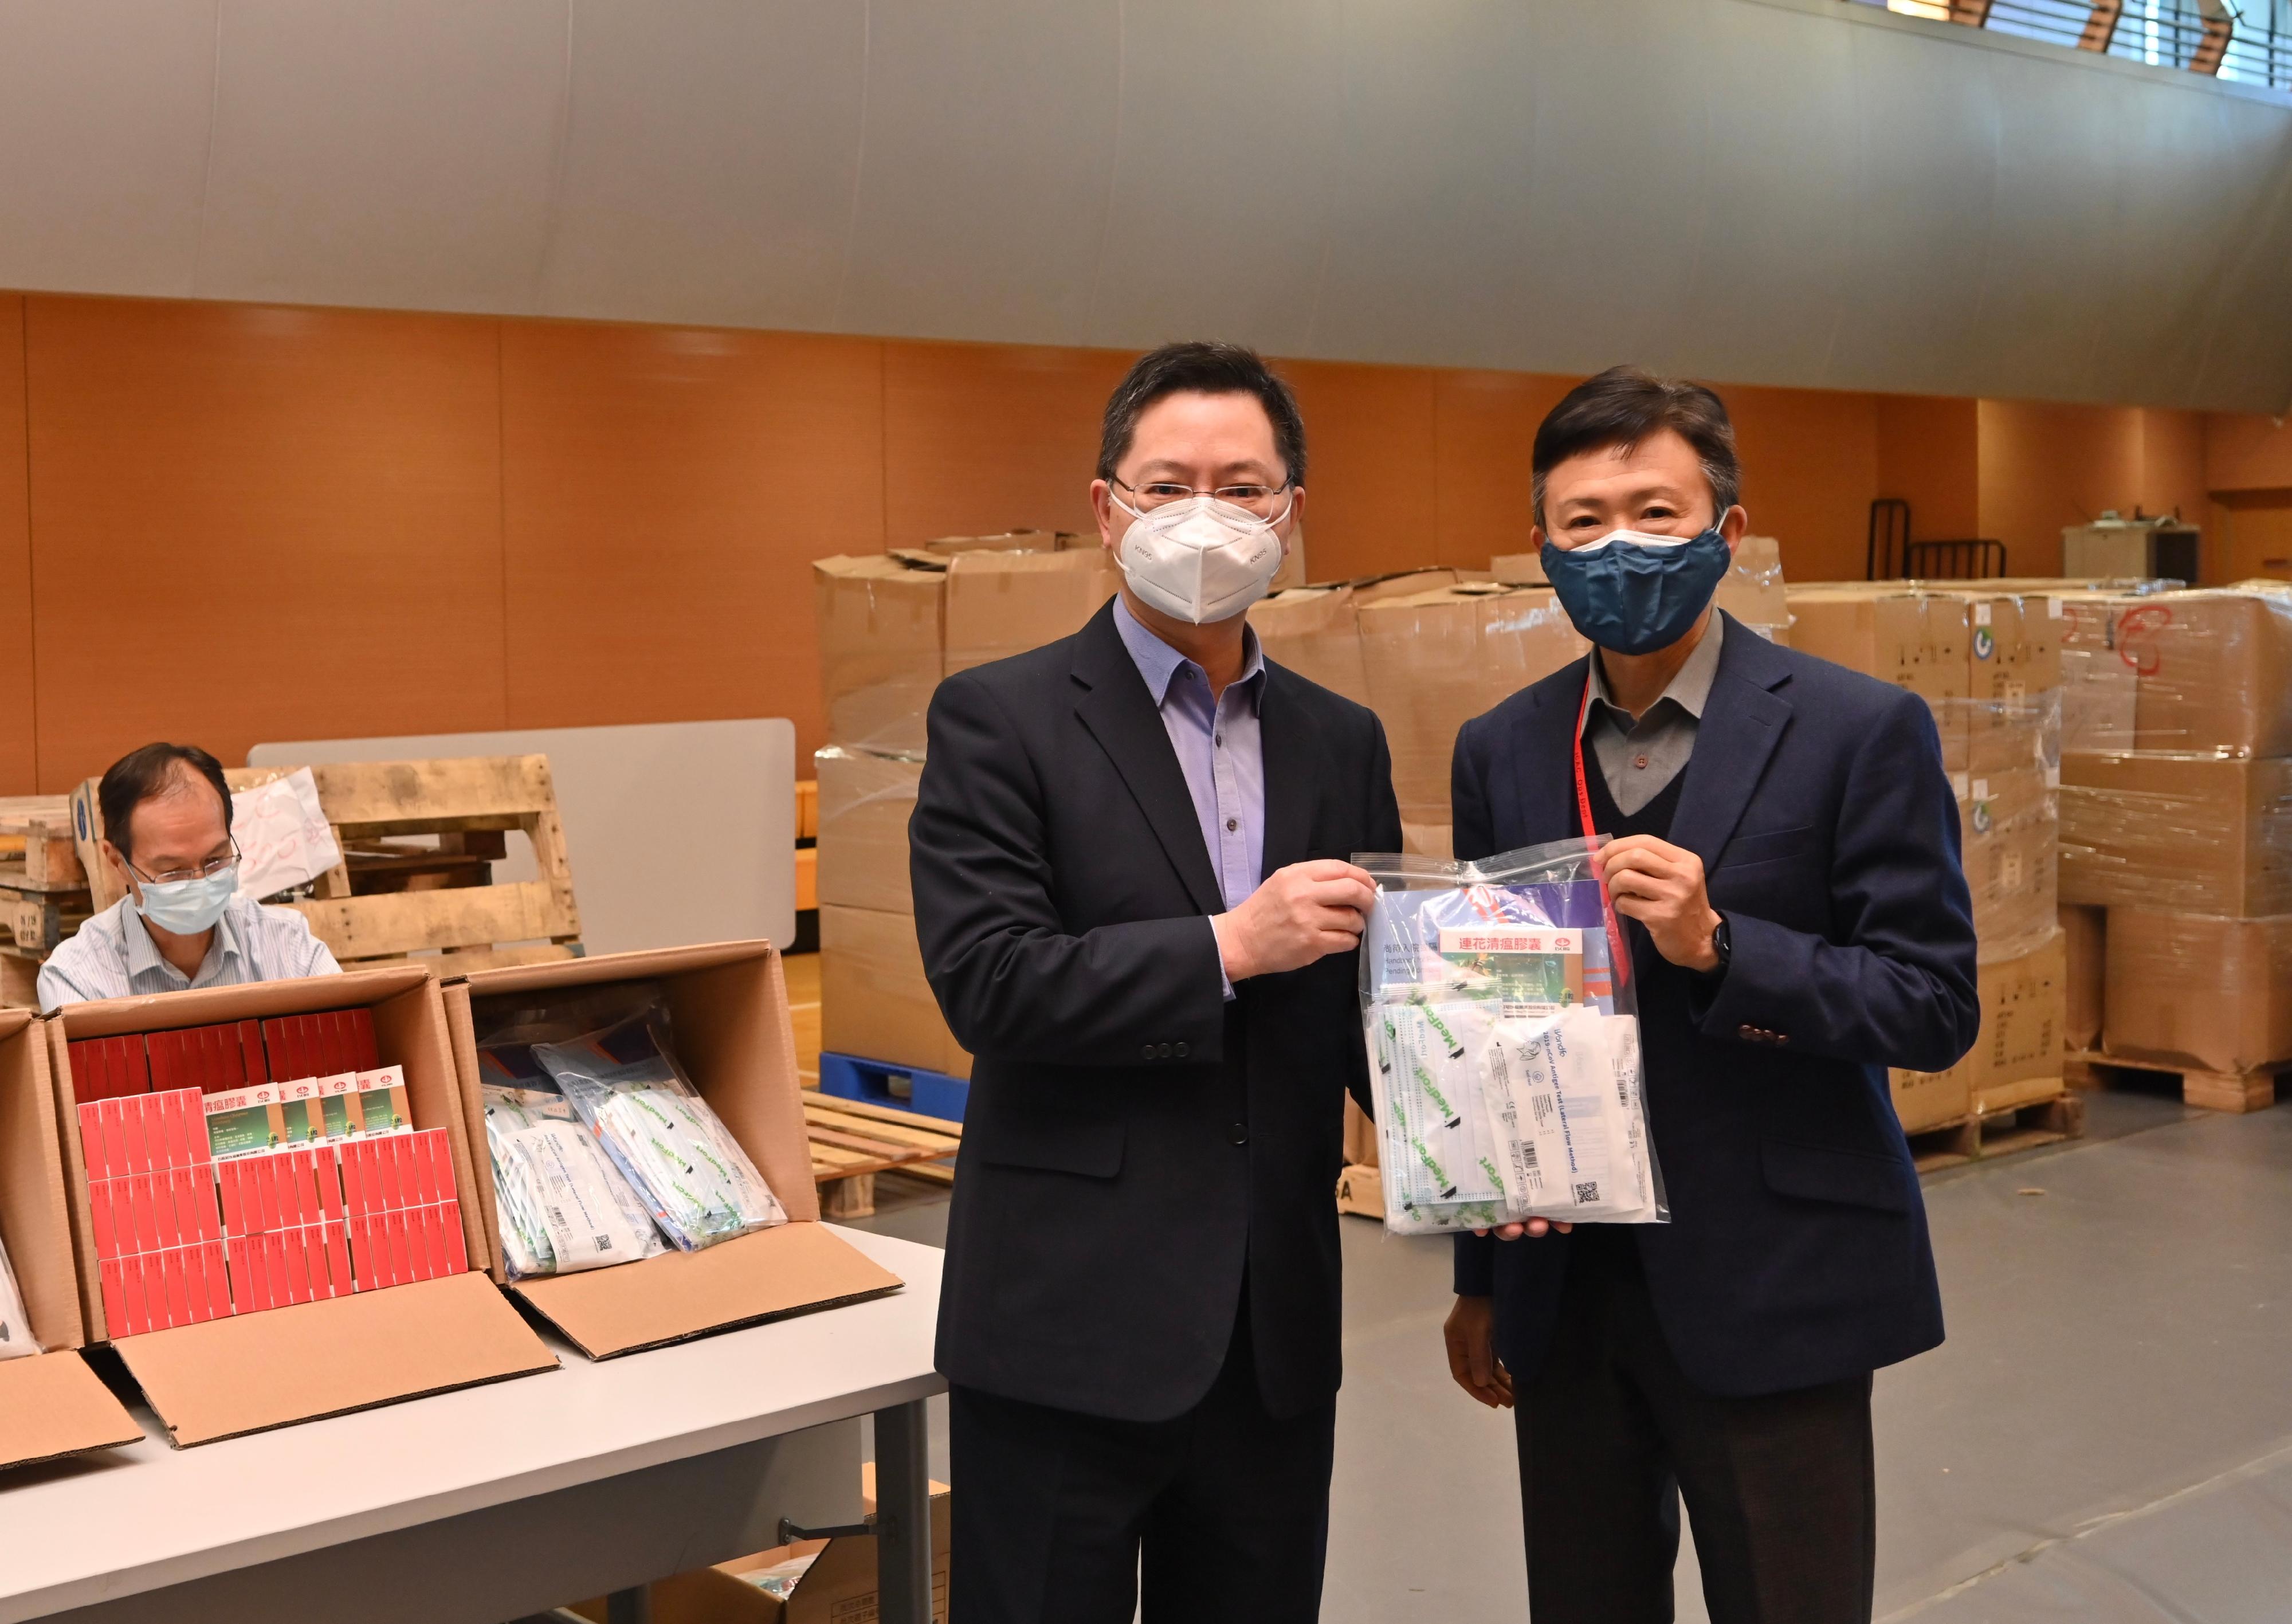 The Secretary for Innovation and Technology, Mr Alfred Sit (left), is pictured with the Independent Commission Against Corruption (ICAC) Commissioner, Mr Simon Peh (right), during Mr Sit's visit to the anti-epidemic kit distribution centre located at the ICAC today (March 10) to inspect its operation.